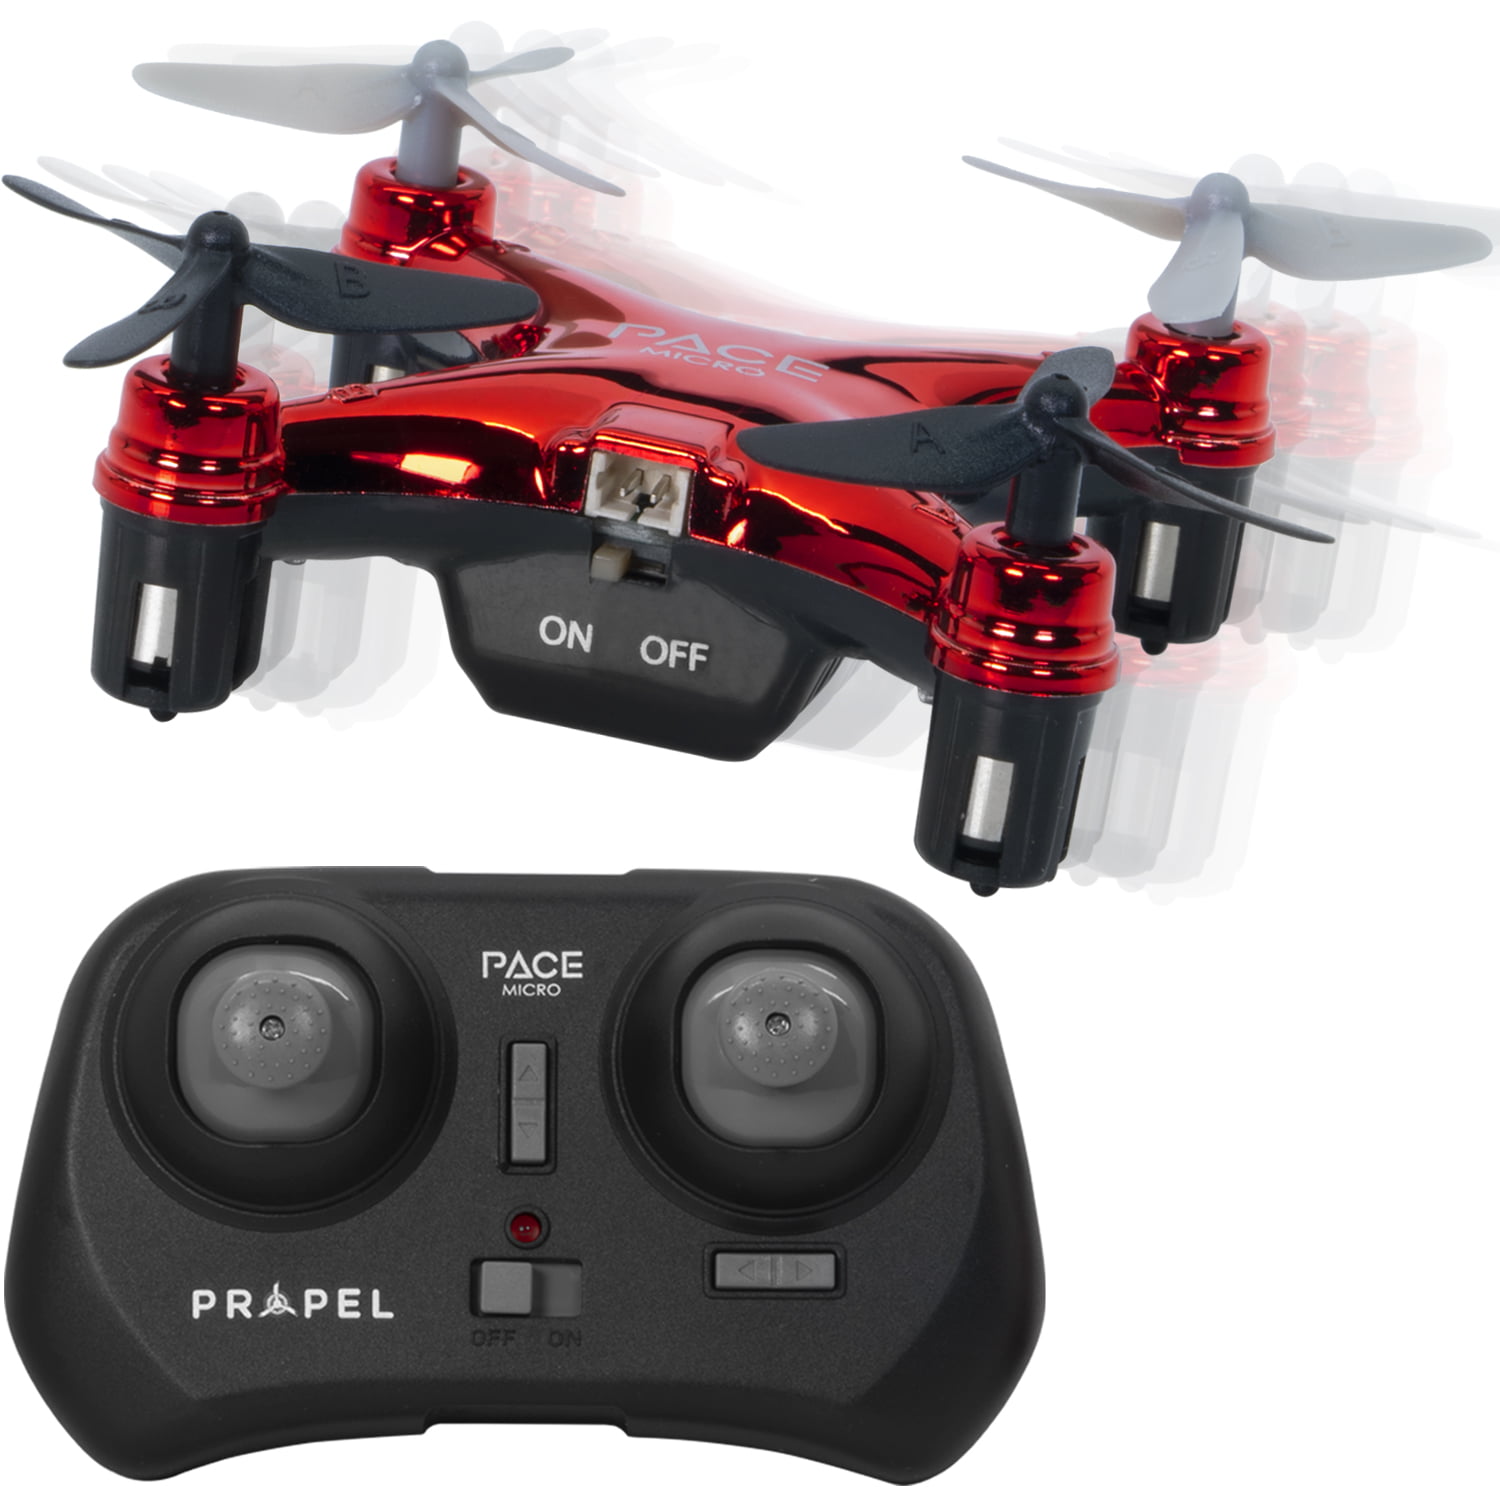 NEW Atom 1.0 Micro Drone Indoor/Outdoor Wireless Quadrocopter Red 